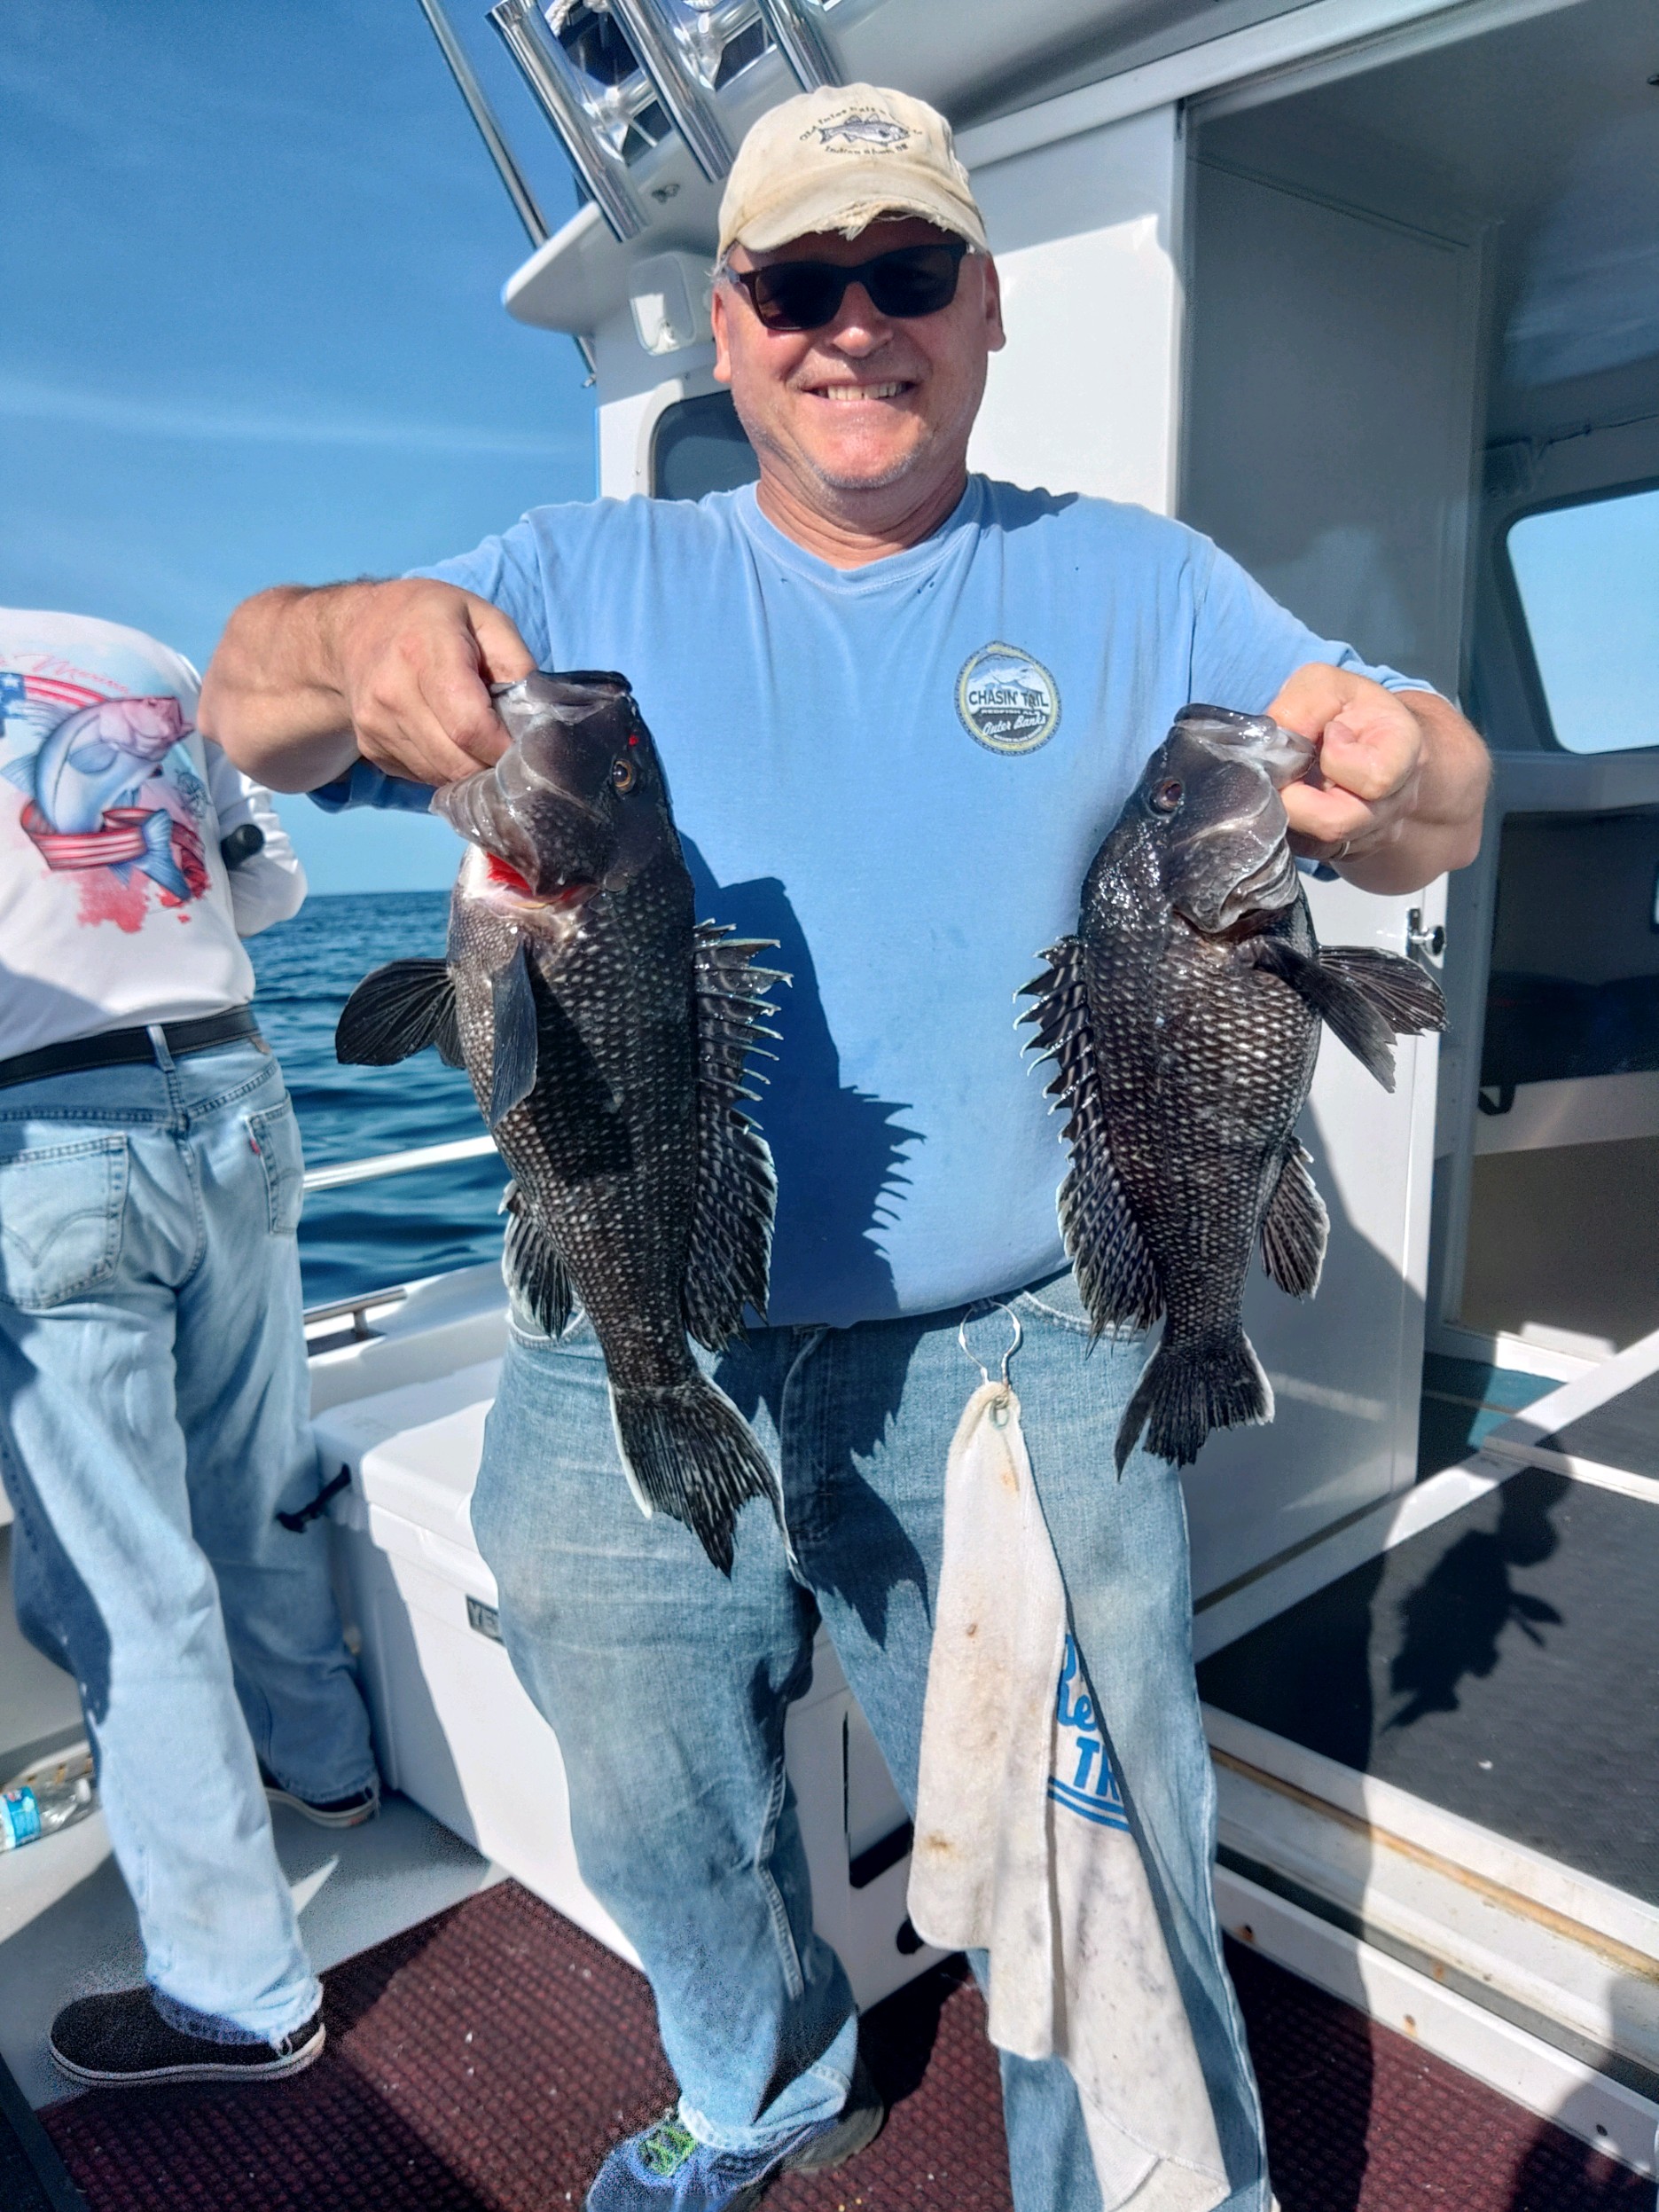 Tons of Tautog, Sea Bass Over 5 Pounds and Flounder Over 6